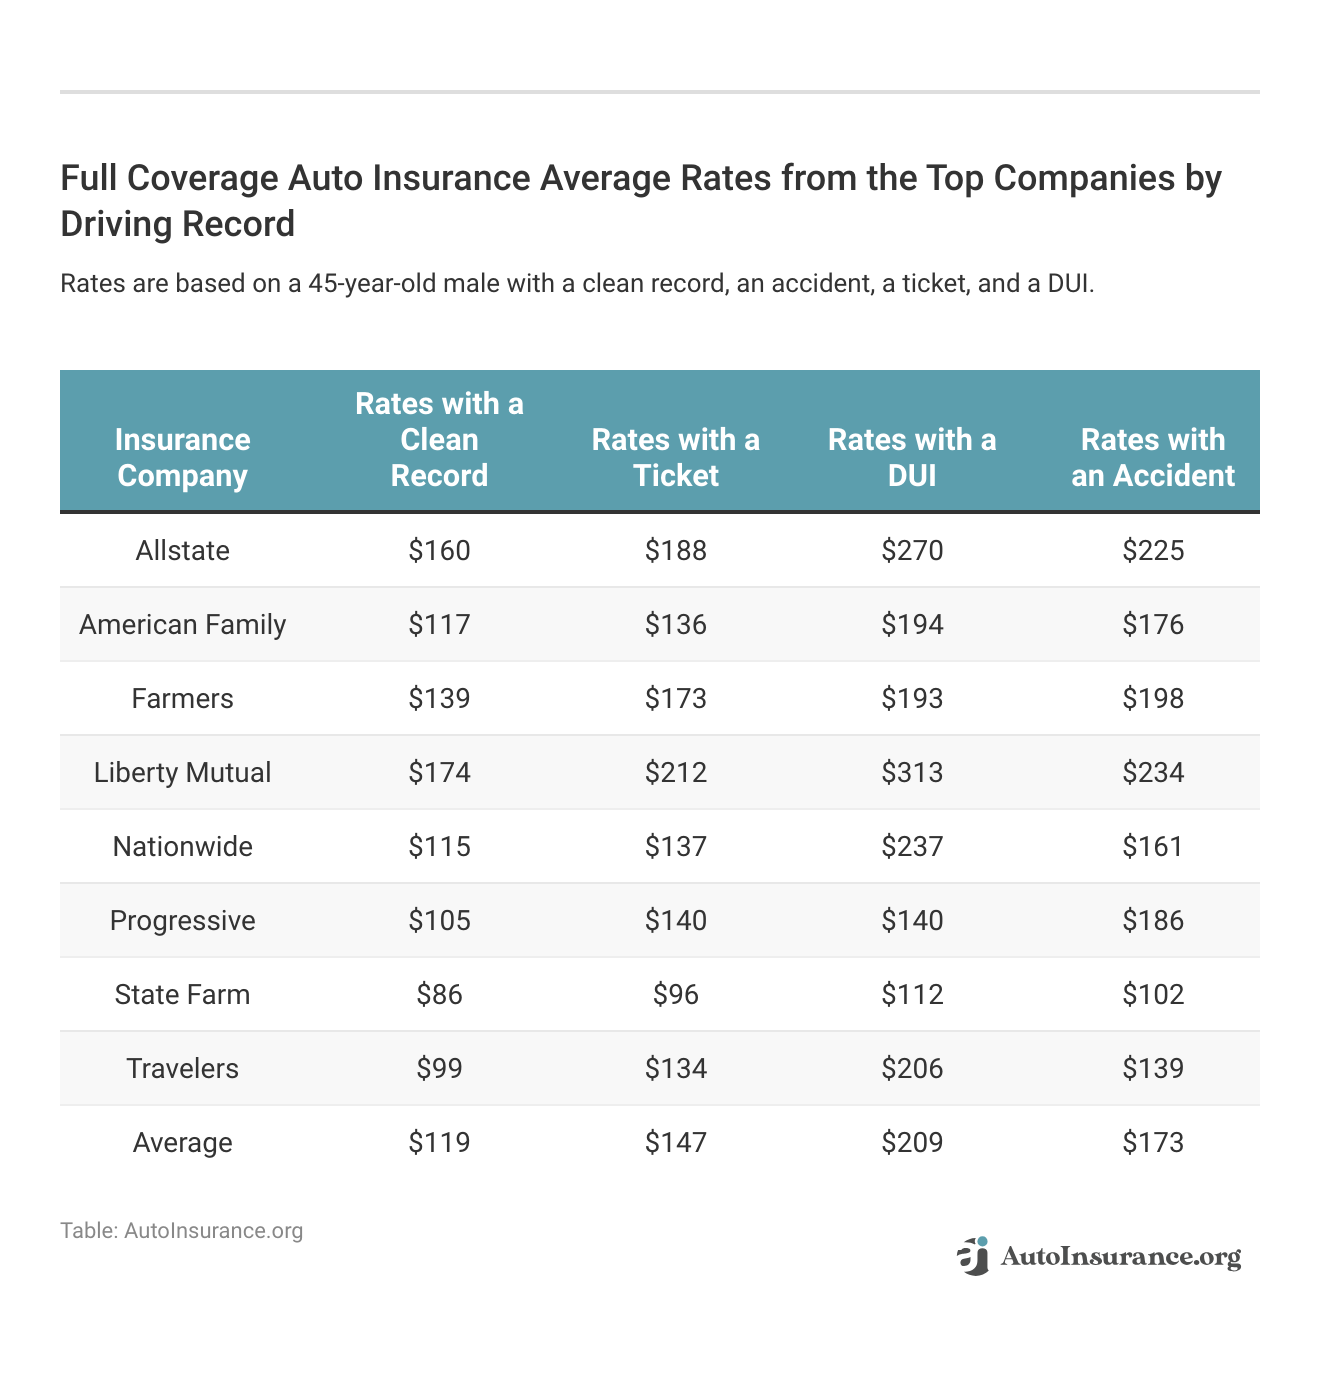 <h3>Full Coverage Auto Insurance Average Rates from the Top Companies by Driving Record</h3>